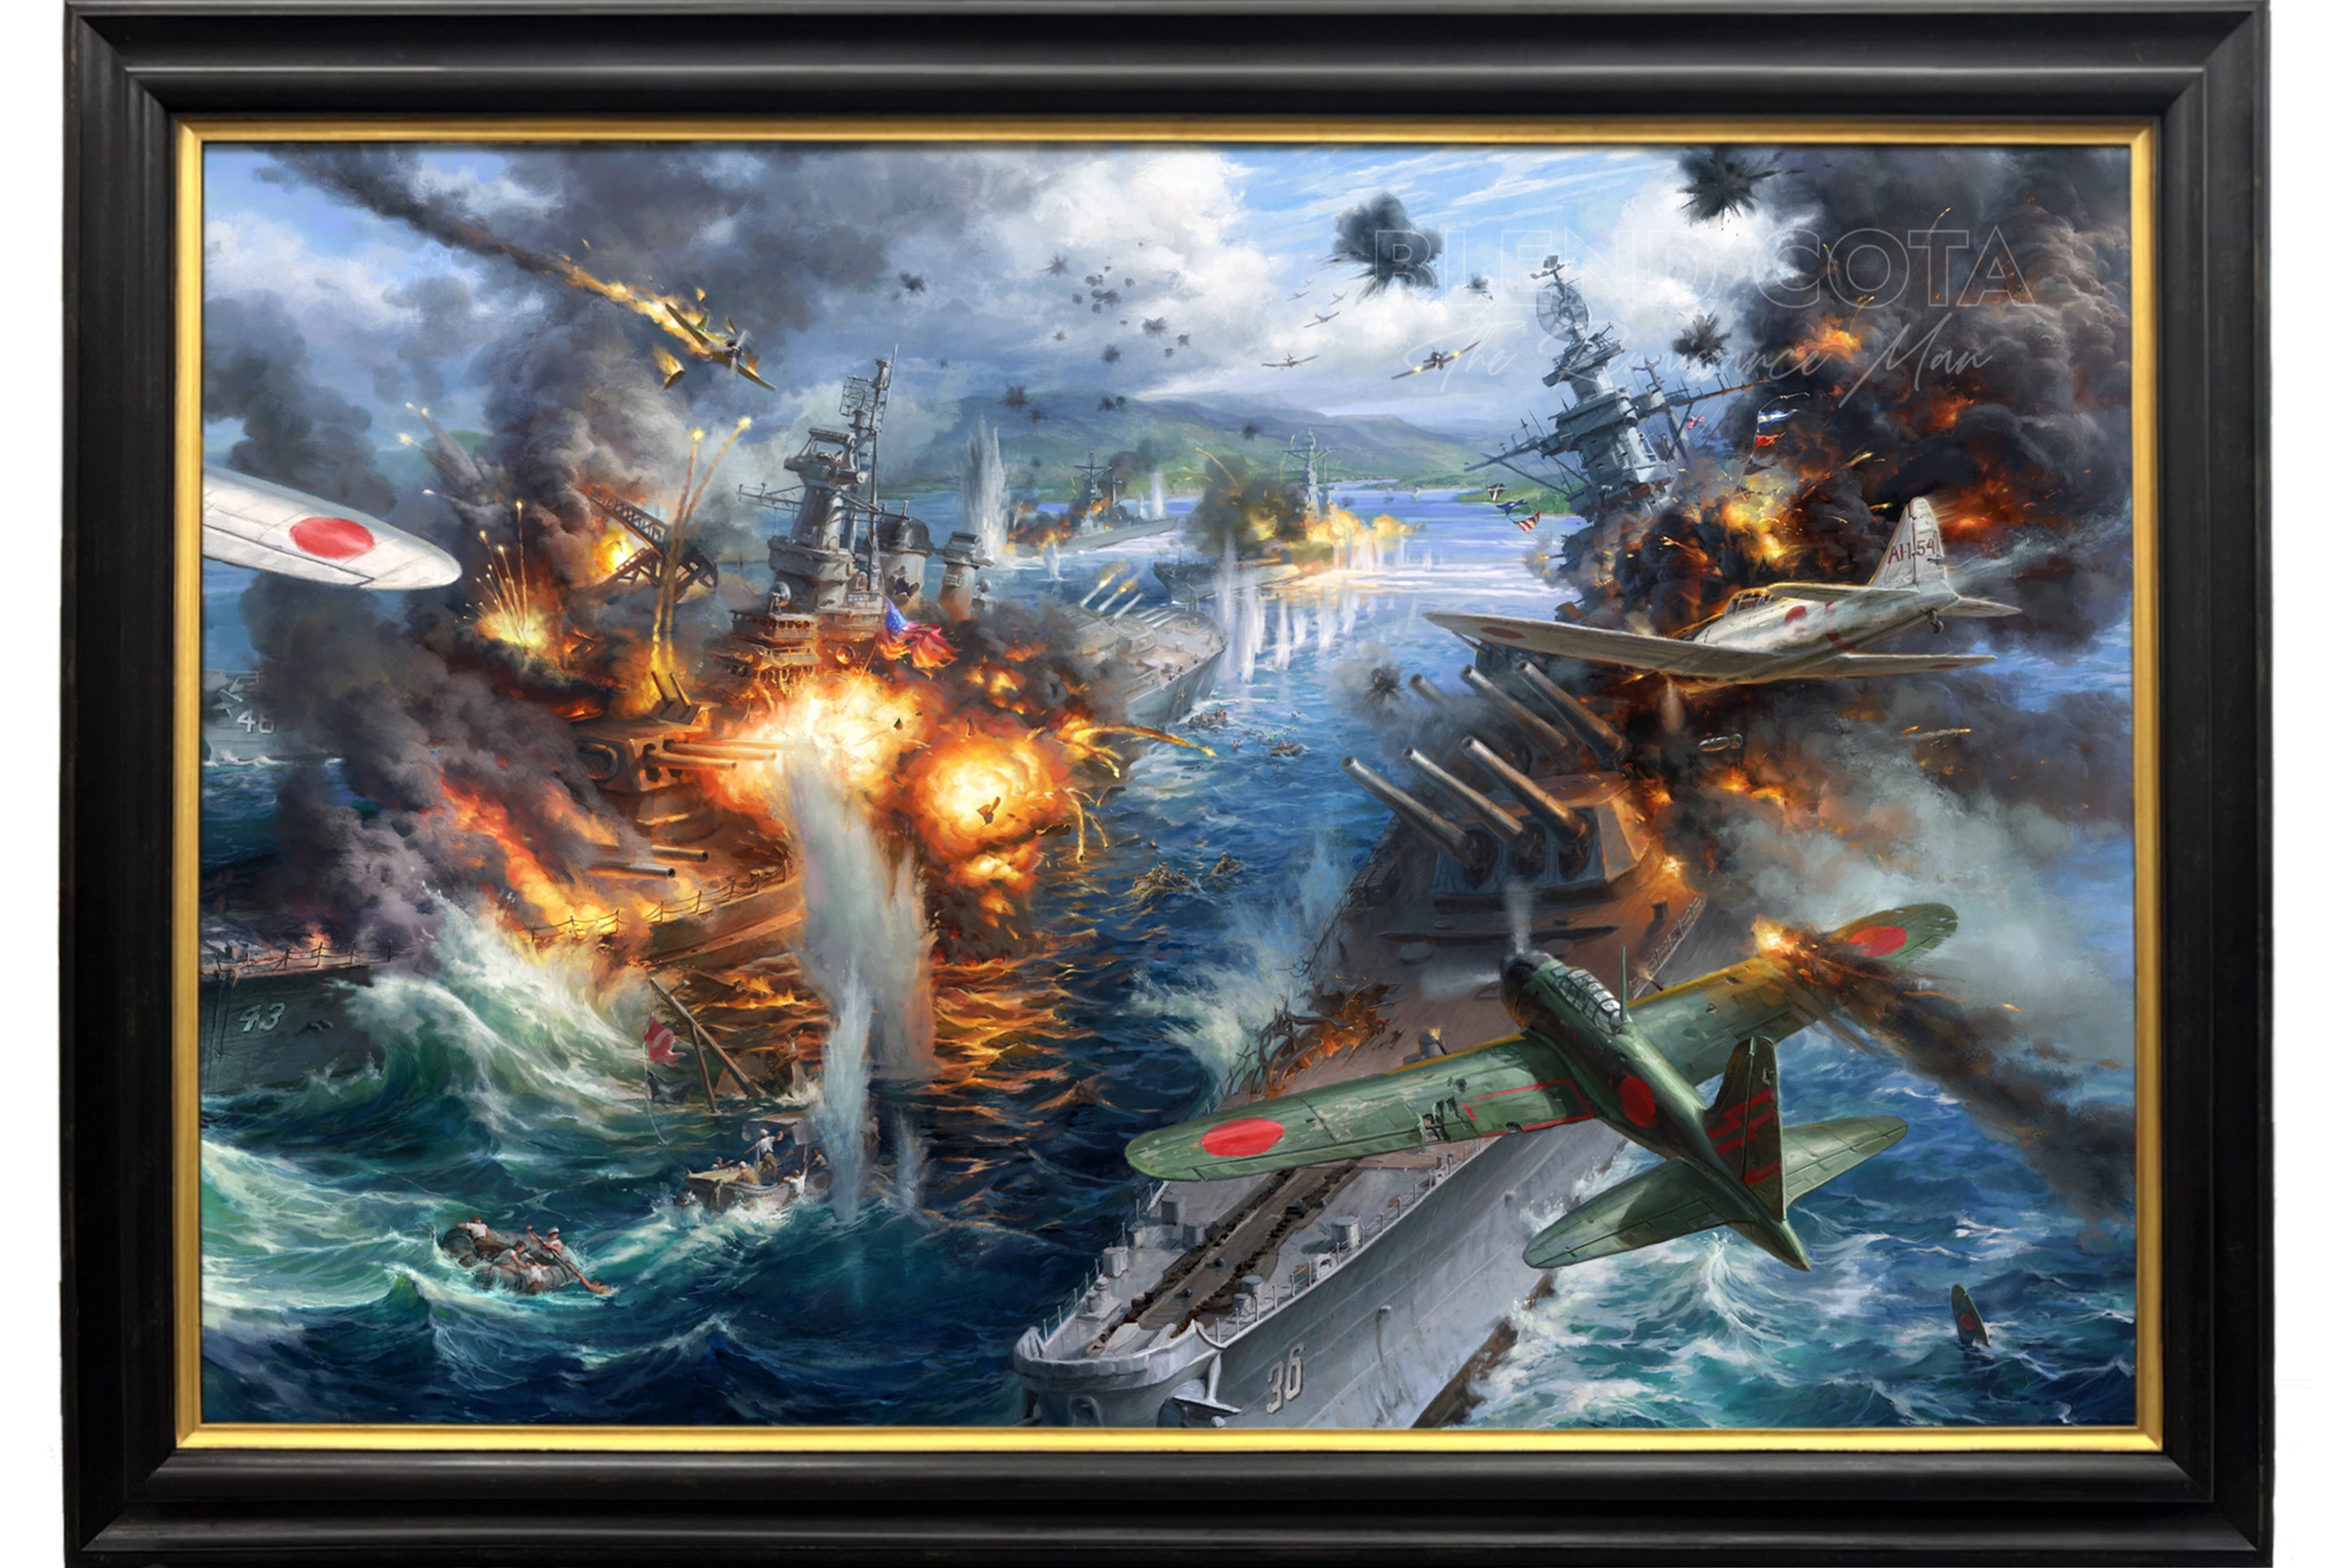 Oil on canvas painting of the attack on Pearl Harbor, Japanese planes bombing American vessels and battleships, on a background of destruction, smoke and fire, realism style with detailed brushstrokes.